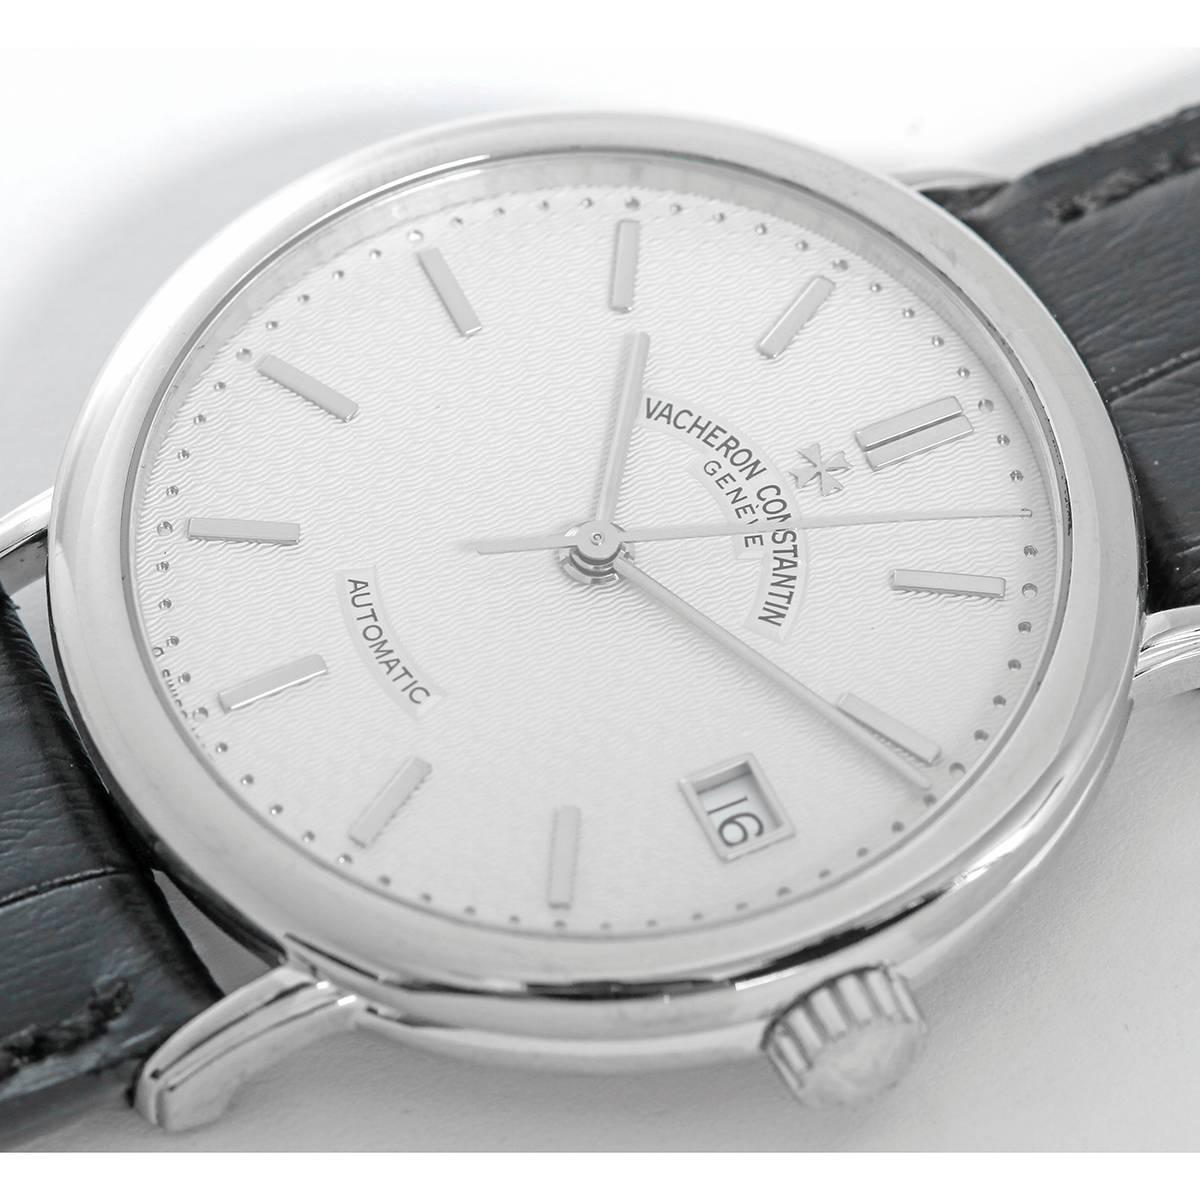 Automatic, self winding. 18K White Gold round smooth ( 36mm ). Silver guilloche pattern with applied gold indexes. Baton hands, 33 jewels; Date at 3 o'clock. Black crock strap with Vacheron Constantin buckle. Pre- owned with box and papers.